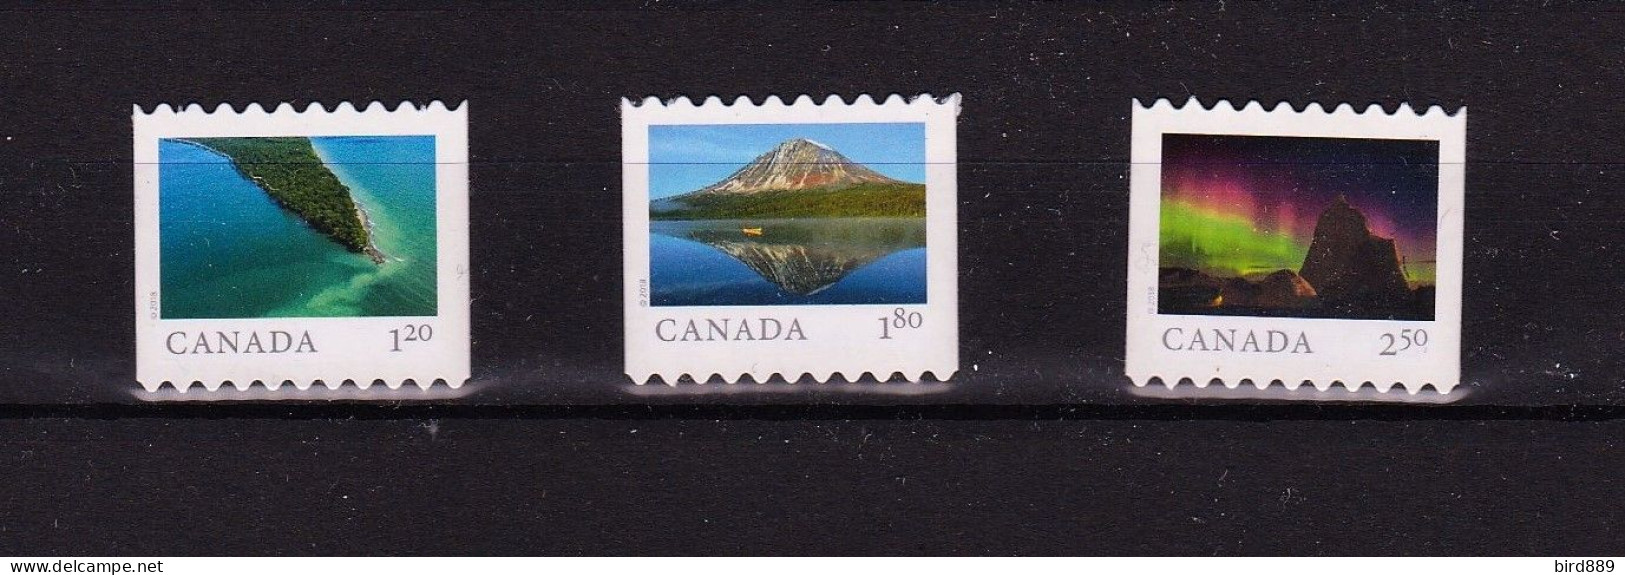 2018 Canada From Far And Wide Scenic Photography Set Of 3 Stamps From Booklet MNH - Single Stamps